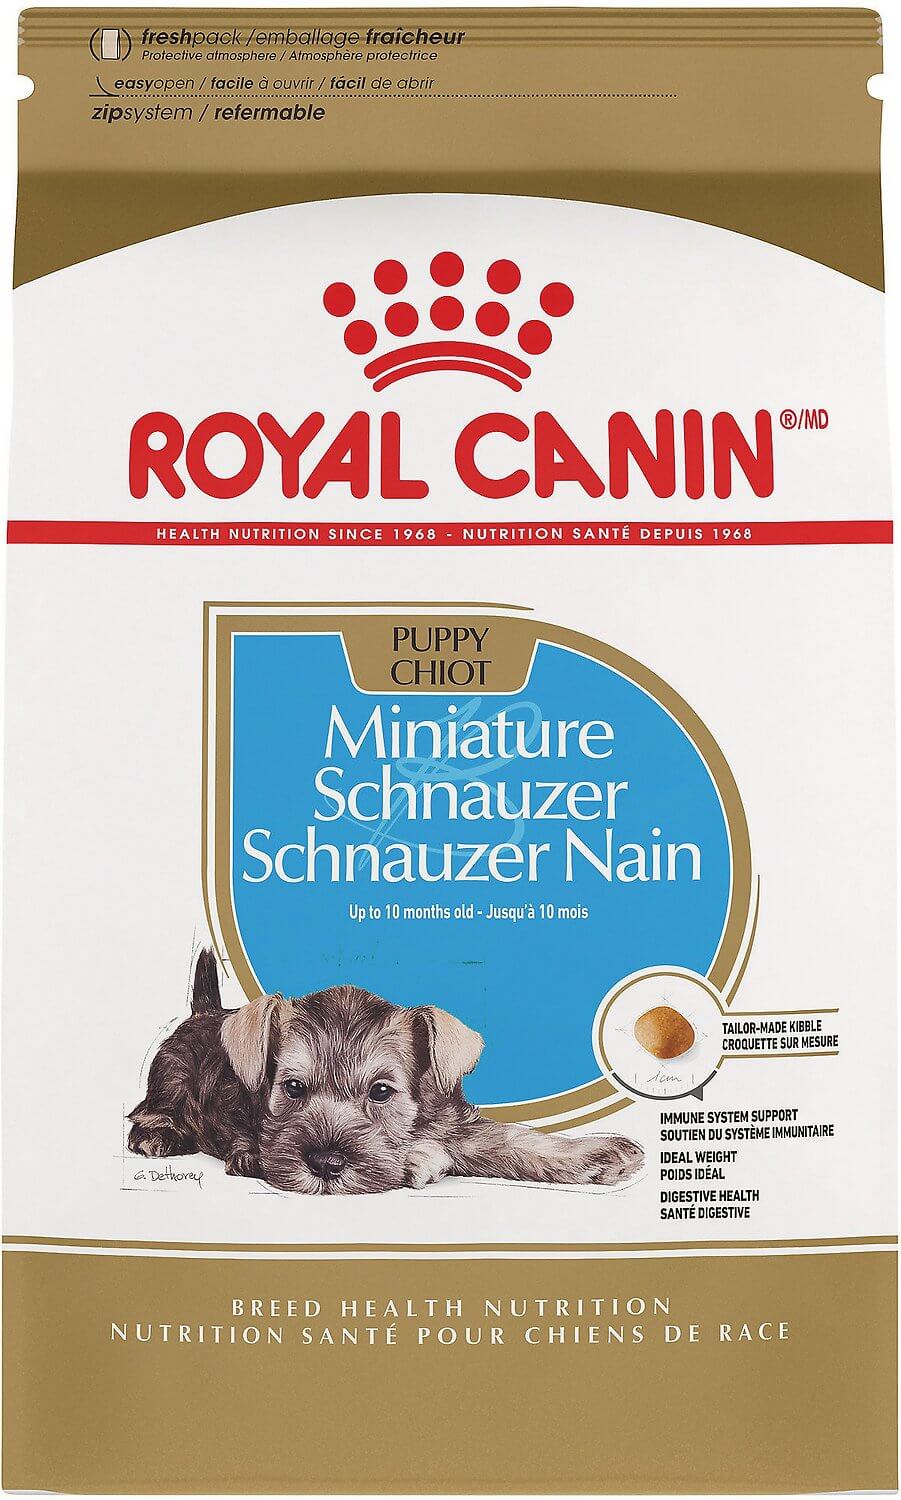 Royal Canin Breed Health Nutrition Puppy Dog Food Review (Dry)